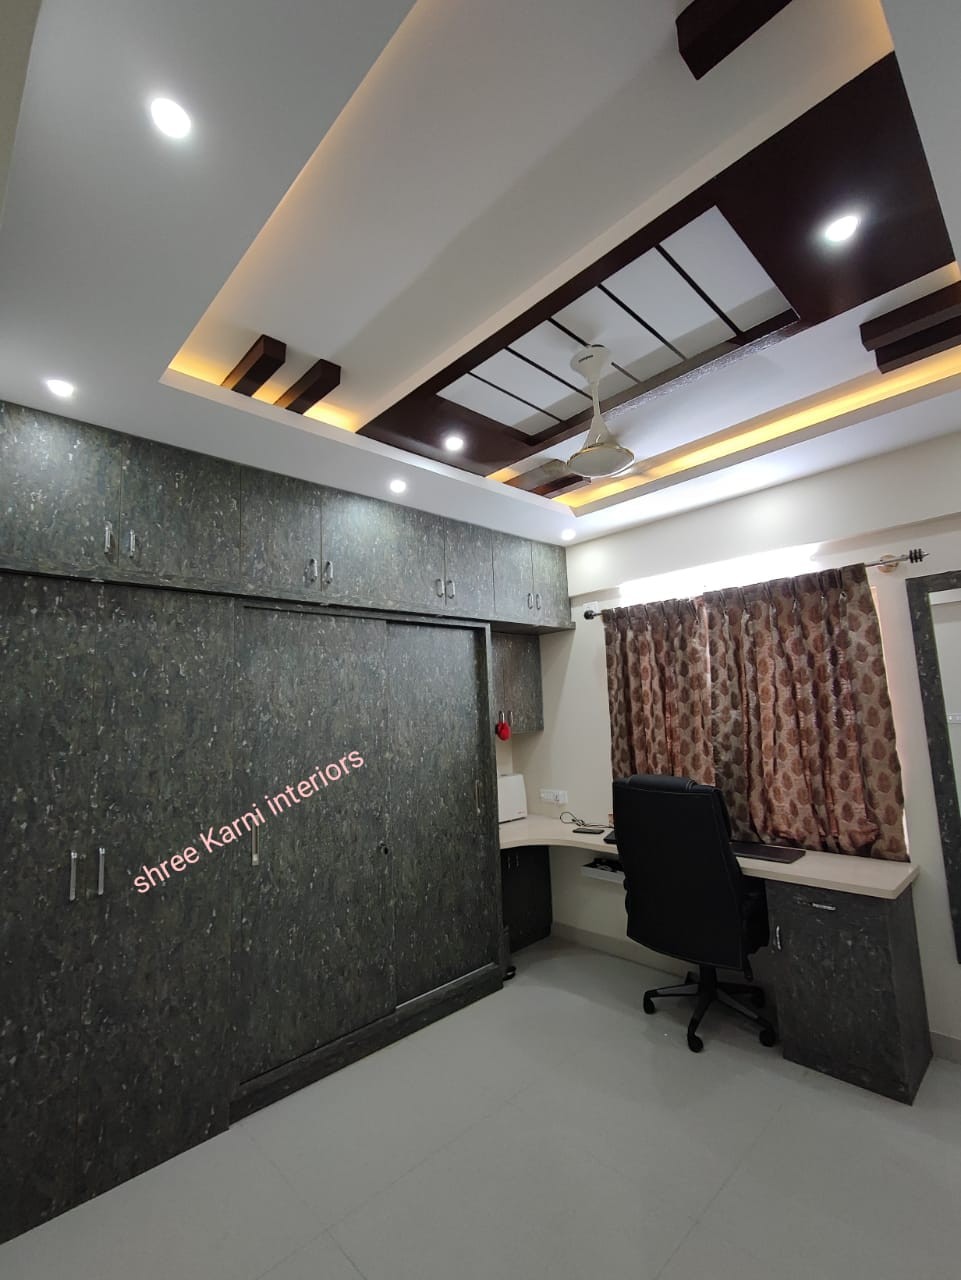 All Interior Works